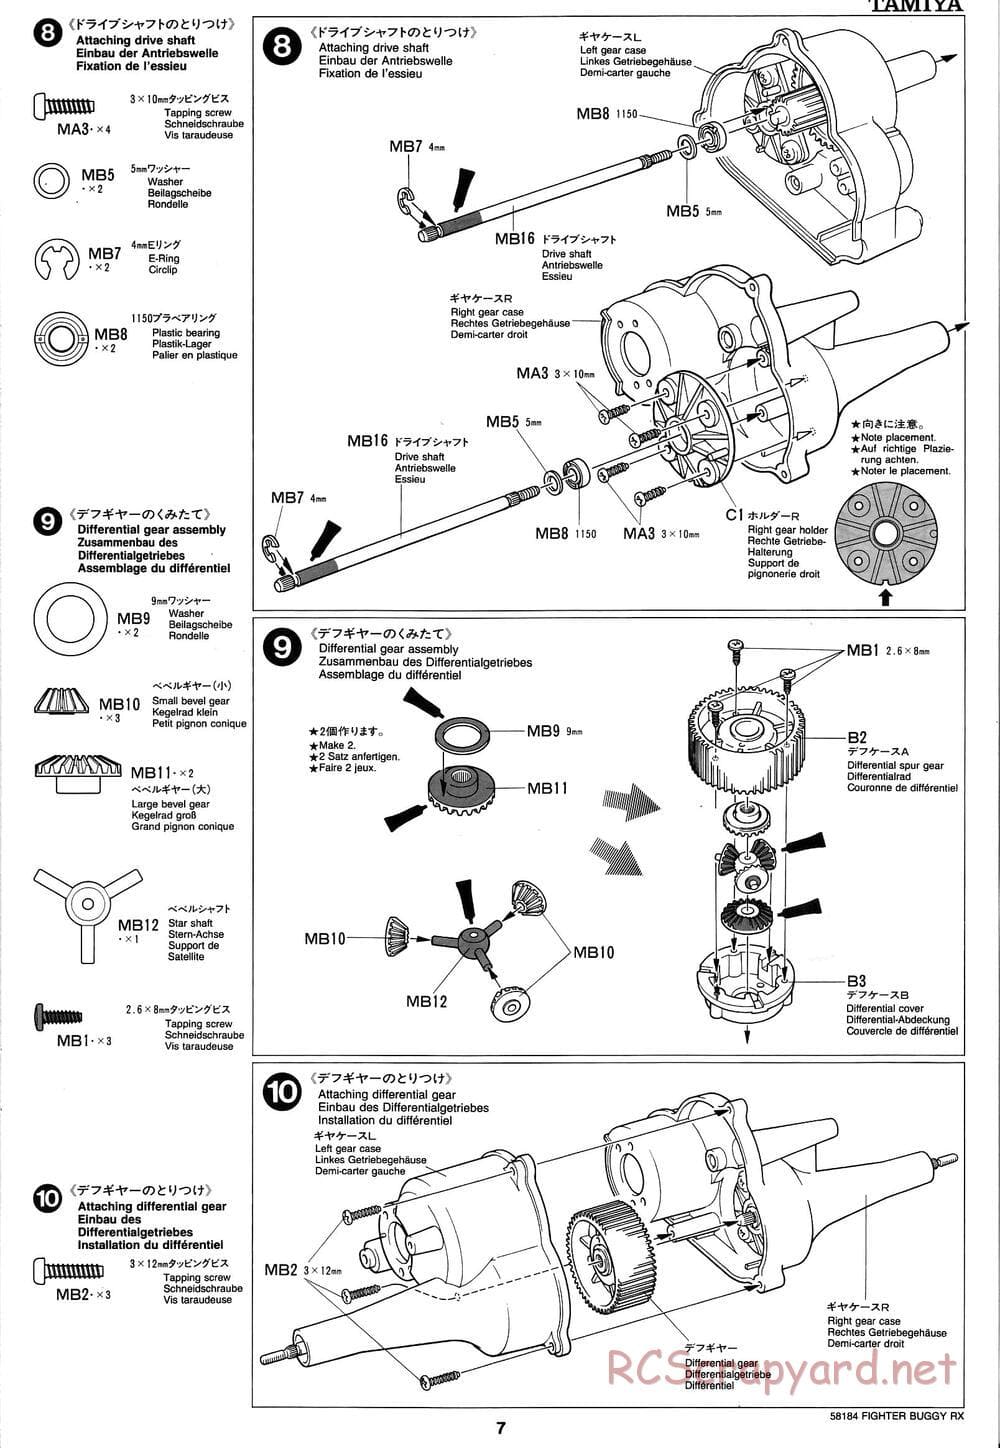 Tamiya - Fighter Buggy RX Chassis - Manual - Page 7